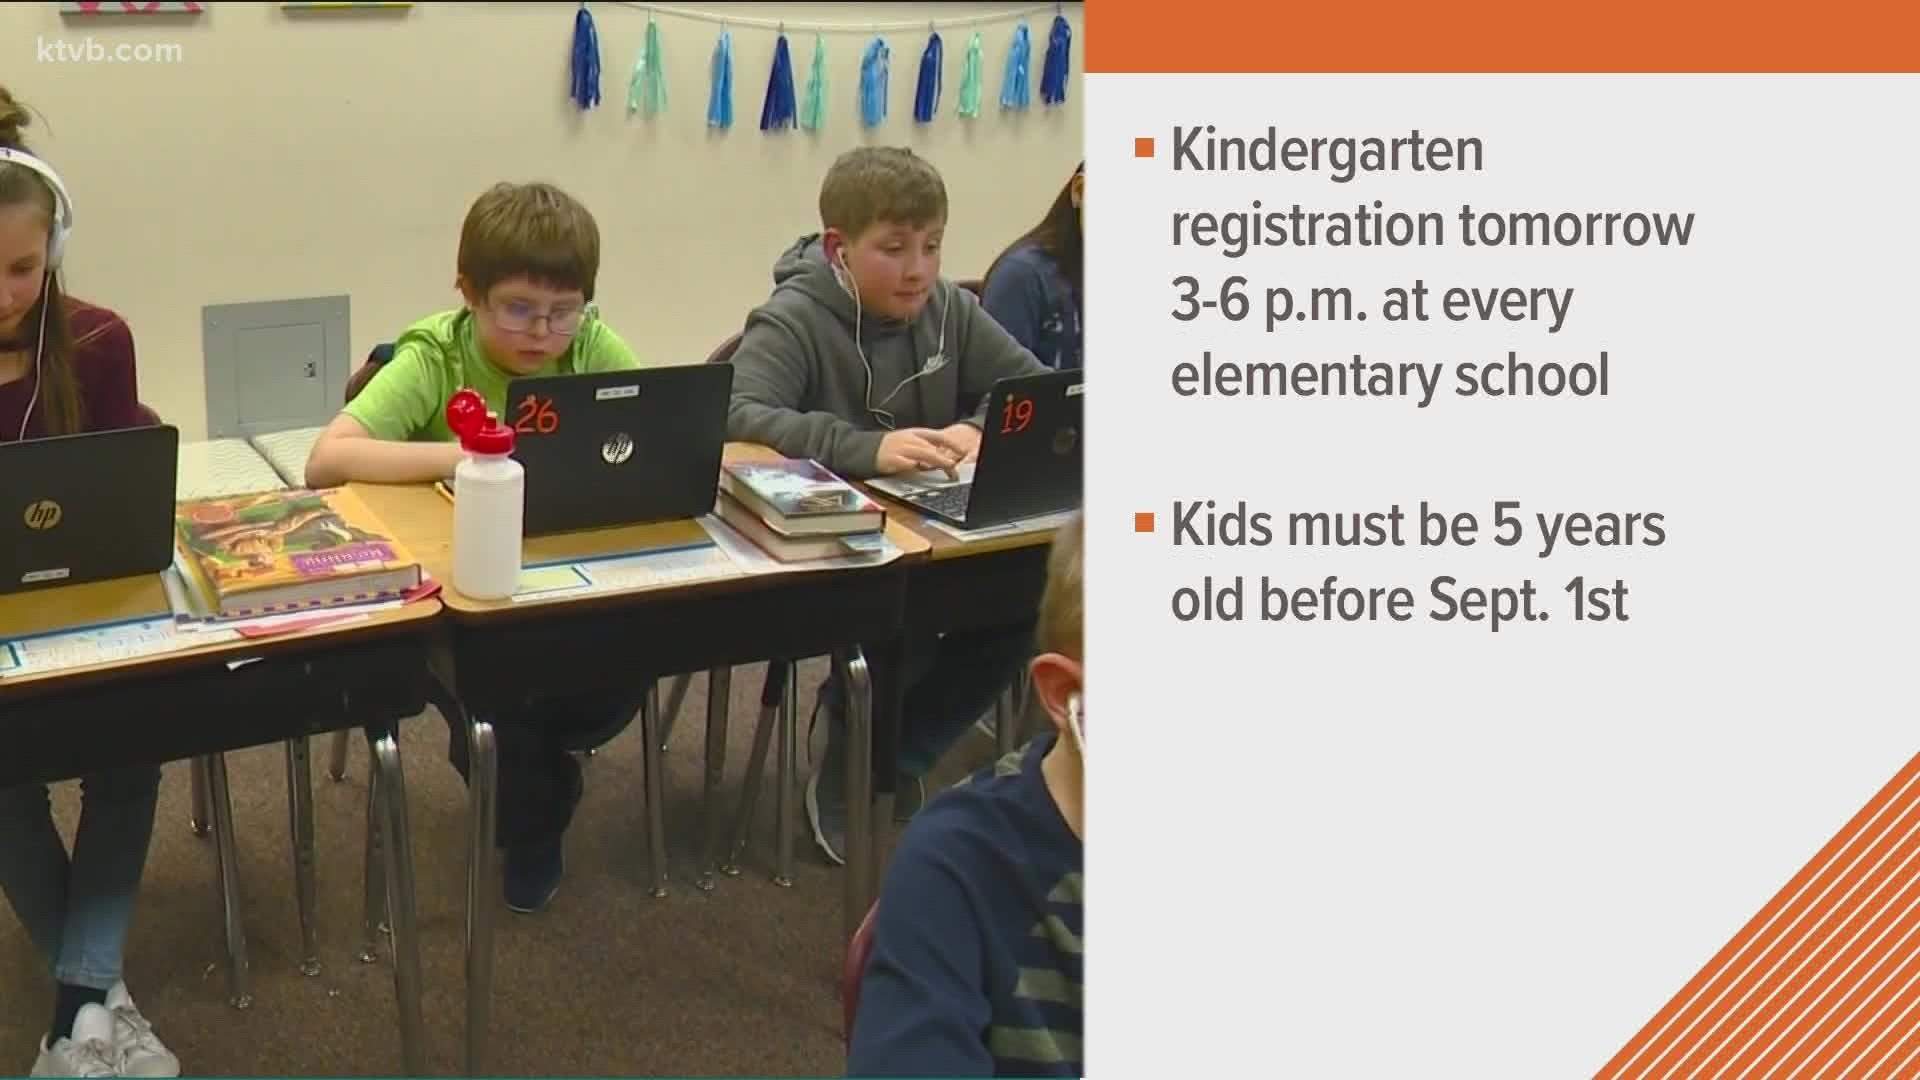 Beginning in the 2022-2023 school year, the Boise School District will provide free, full-day kindergarten for all elementary schools in the district.